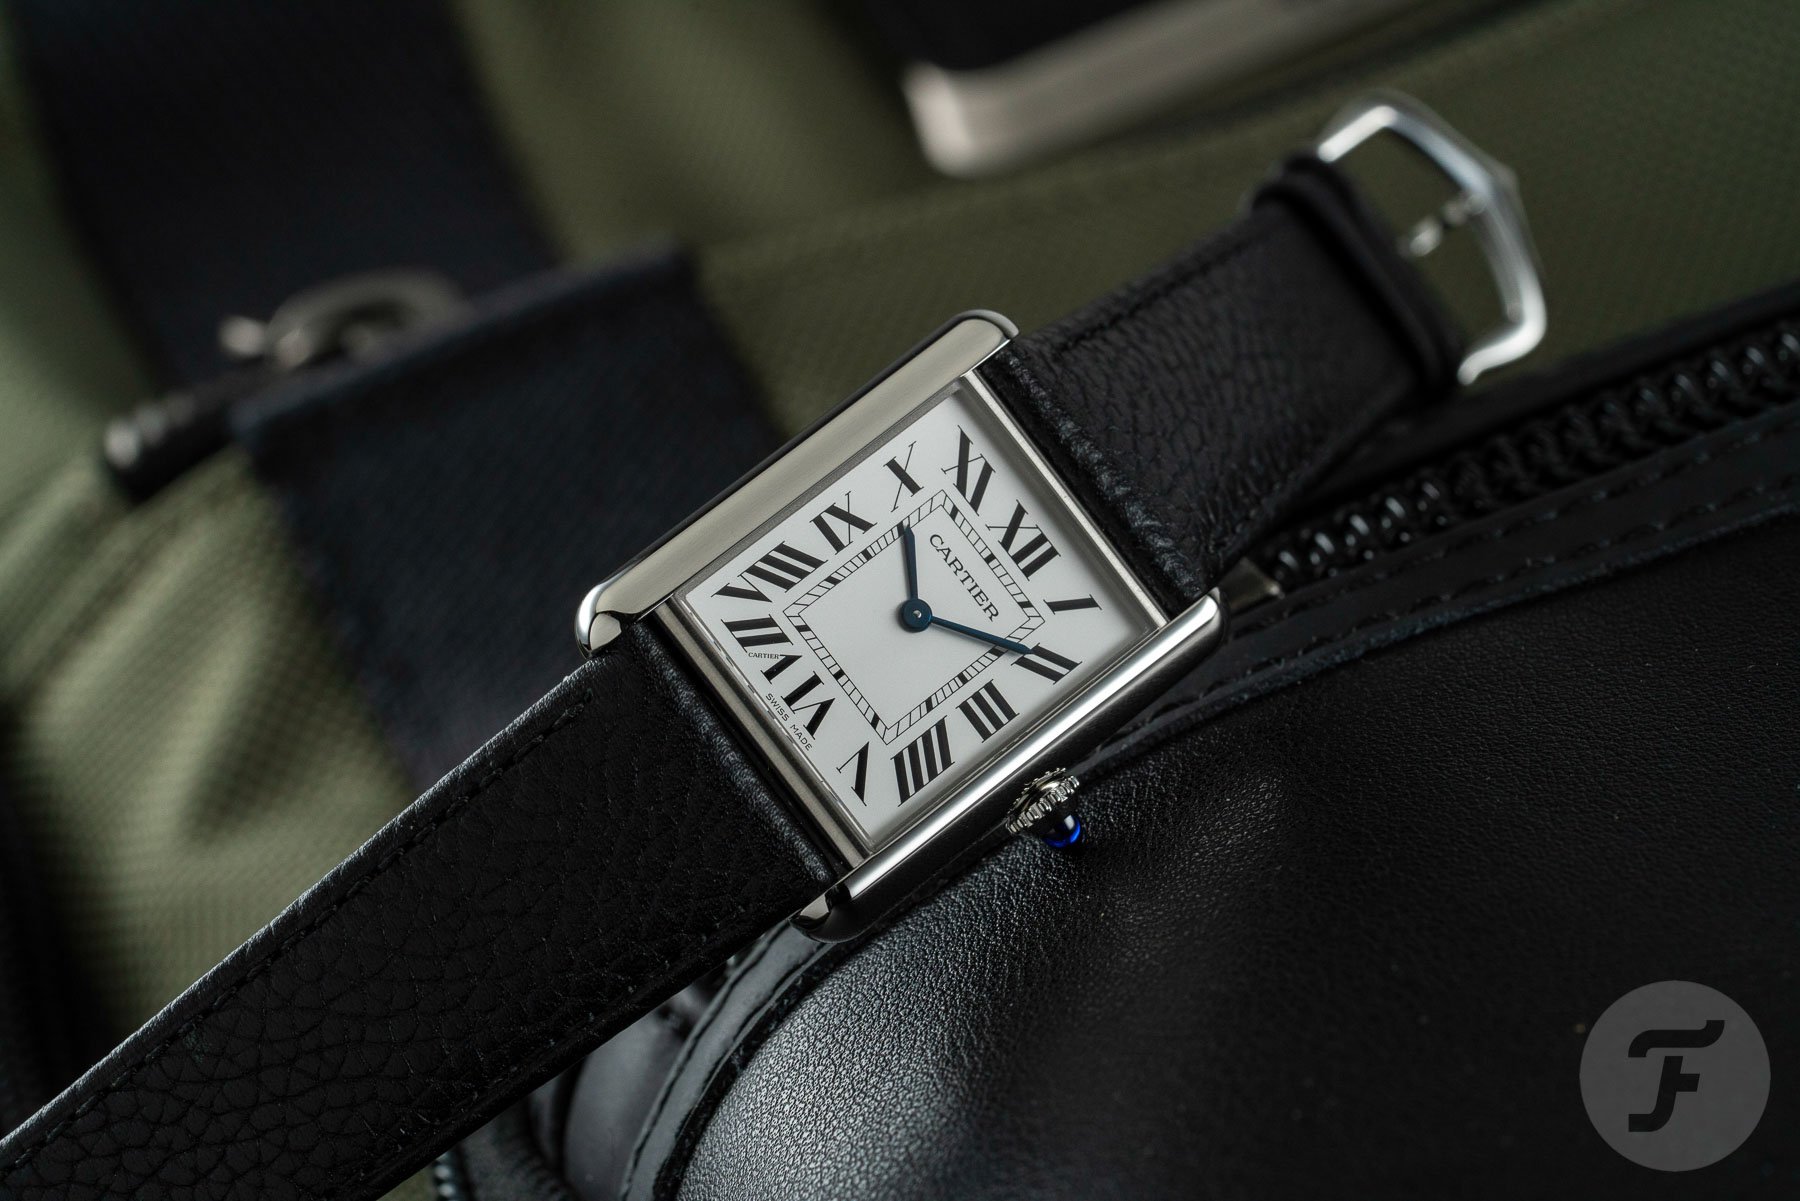 ▻▻ Hands-On: A Closer Look At The New Cartier Tank Must